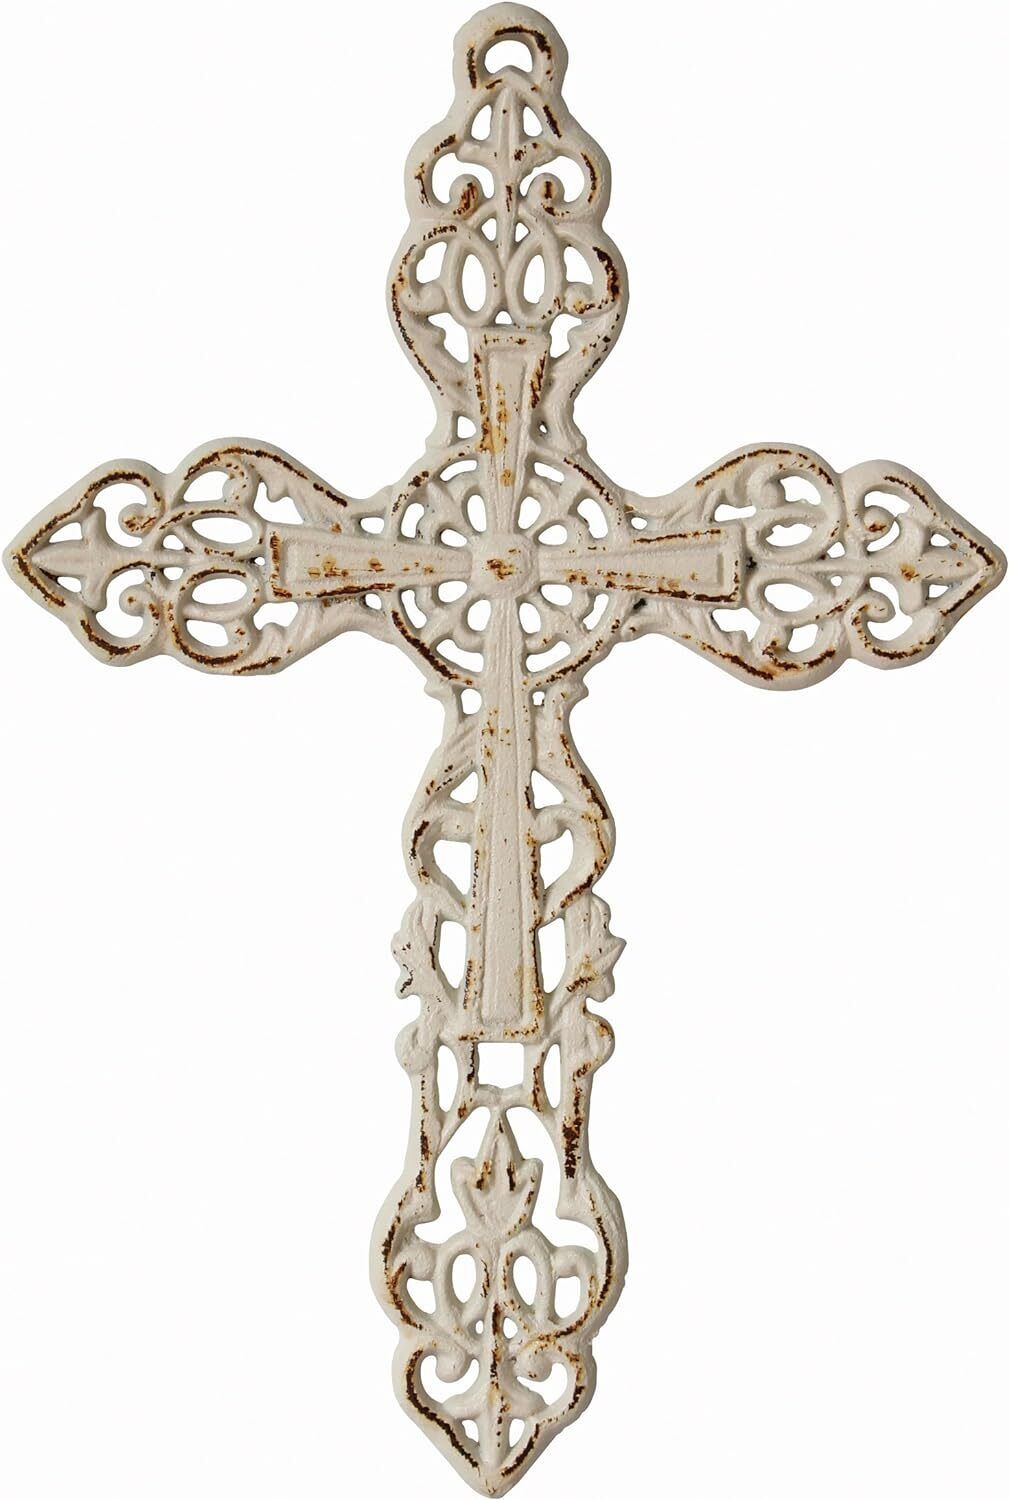 Stonebriar SB-5793A Decorative Distressed Cast Iron Wall Cross with Hanging Loop